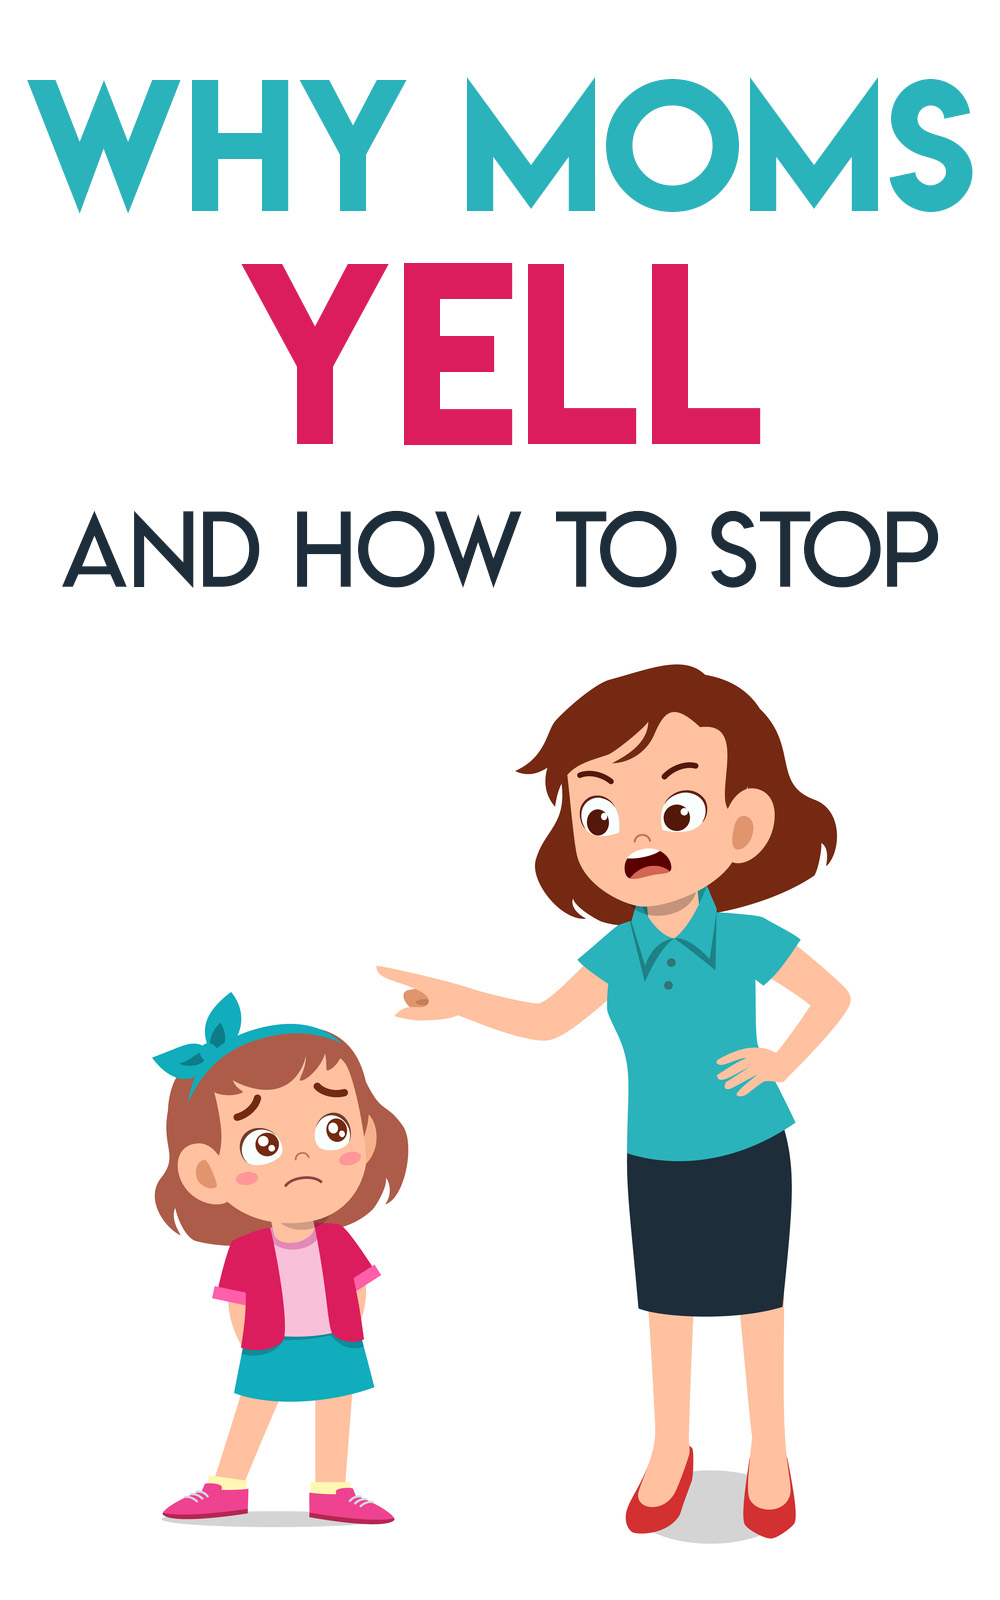 Why Moms Yell—5 Anger Triggers and How to Fix Them via @lara_neves